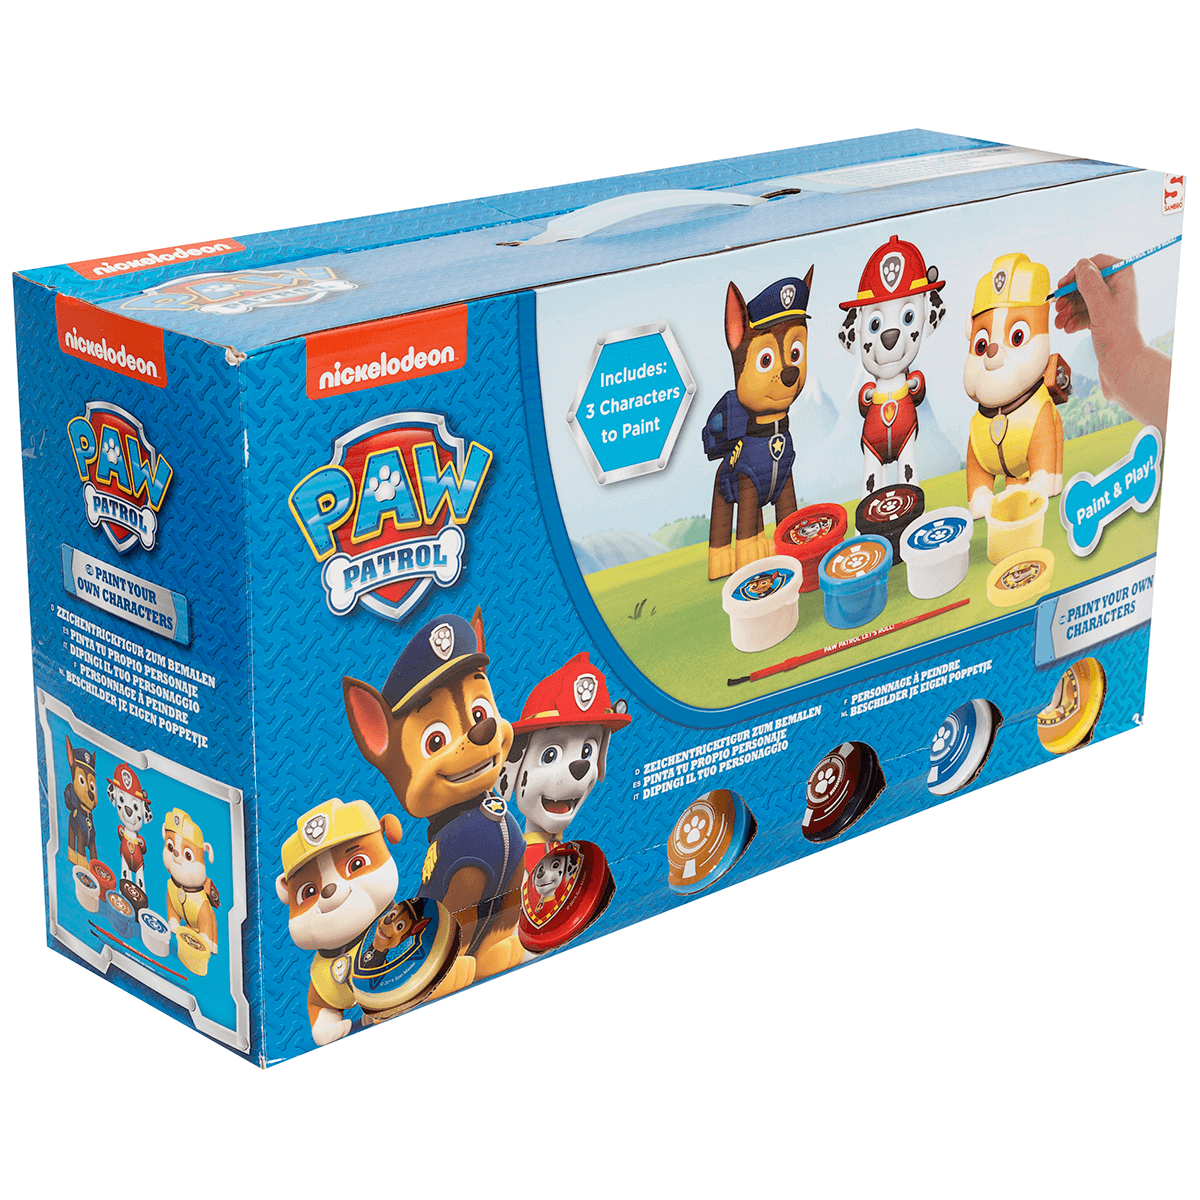 PAW PATROL PAINT YOUR OWN FIGURES CHARACTERS 3D PAINTING ART DIY TOY SET